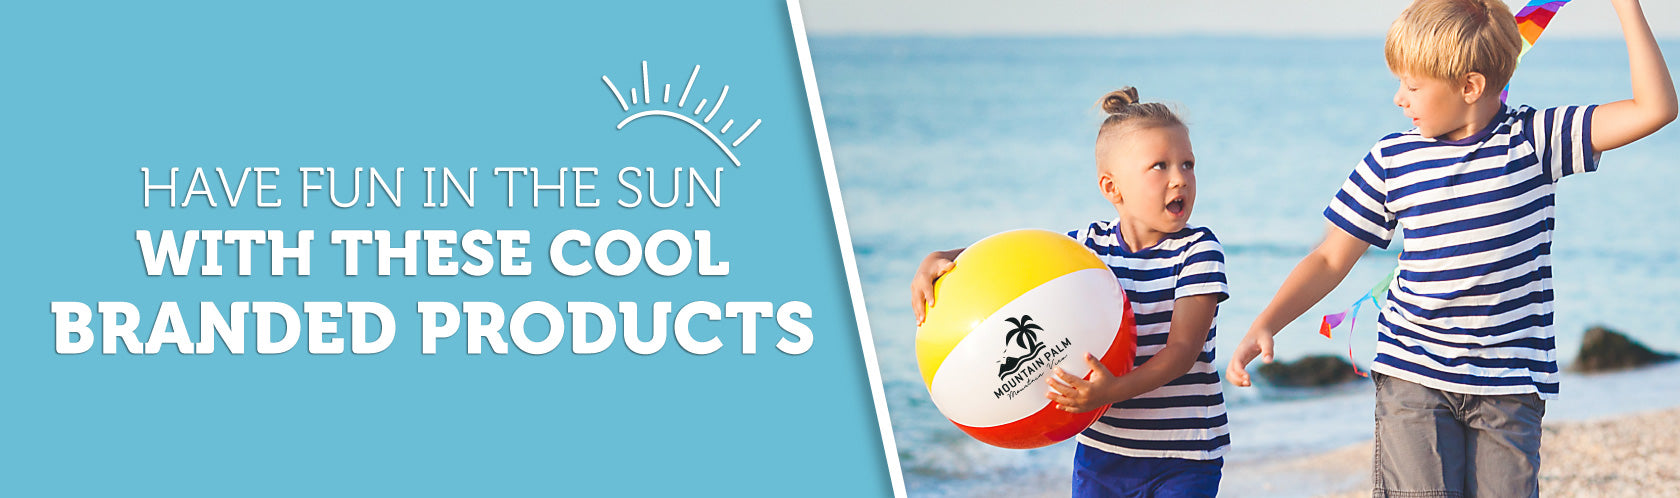 Have Fun in the Sun with these Cool Branded Products